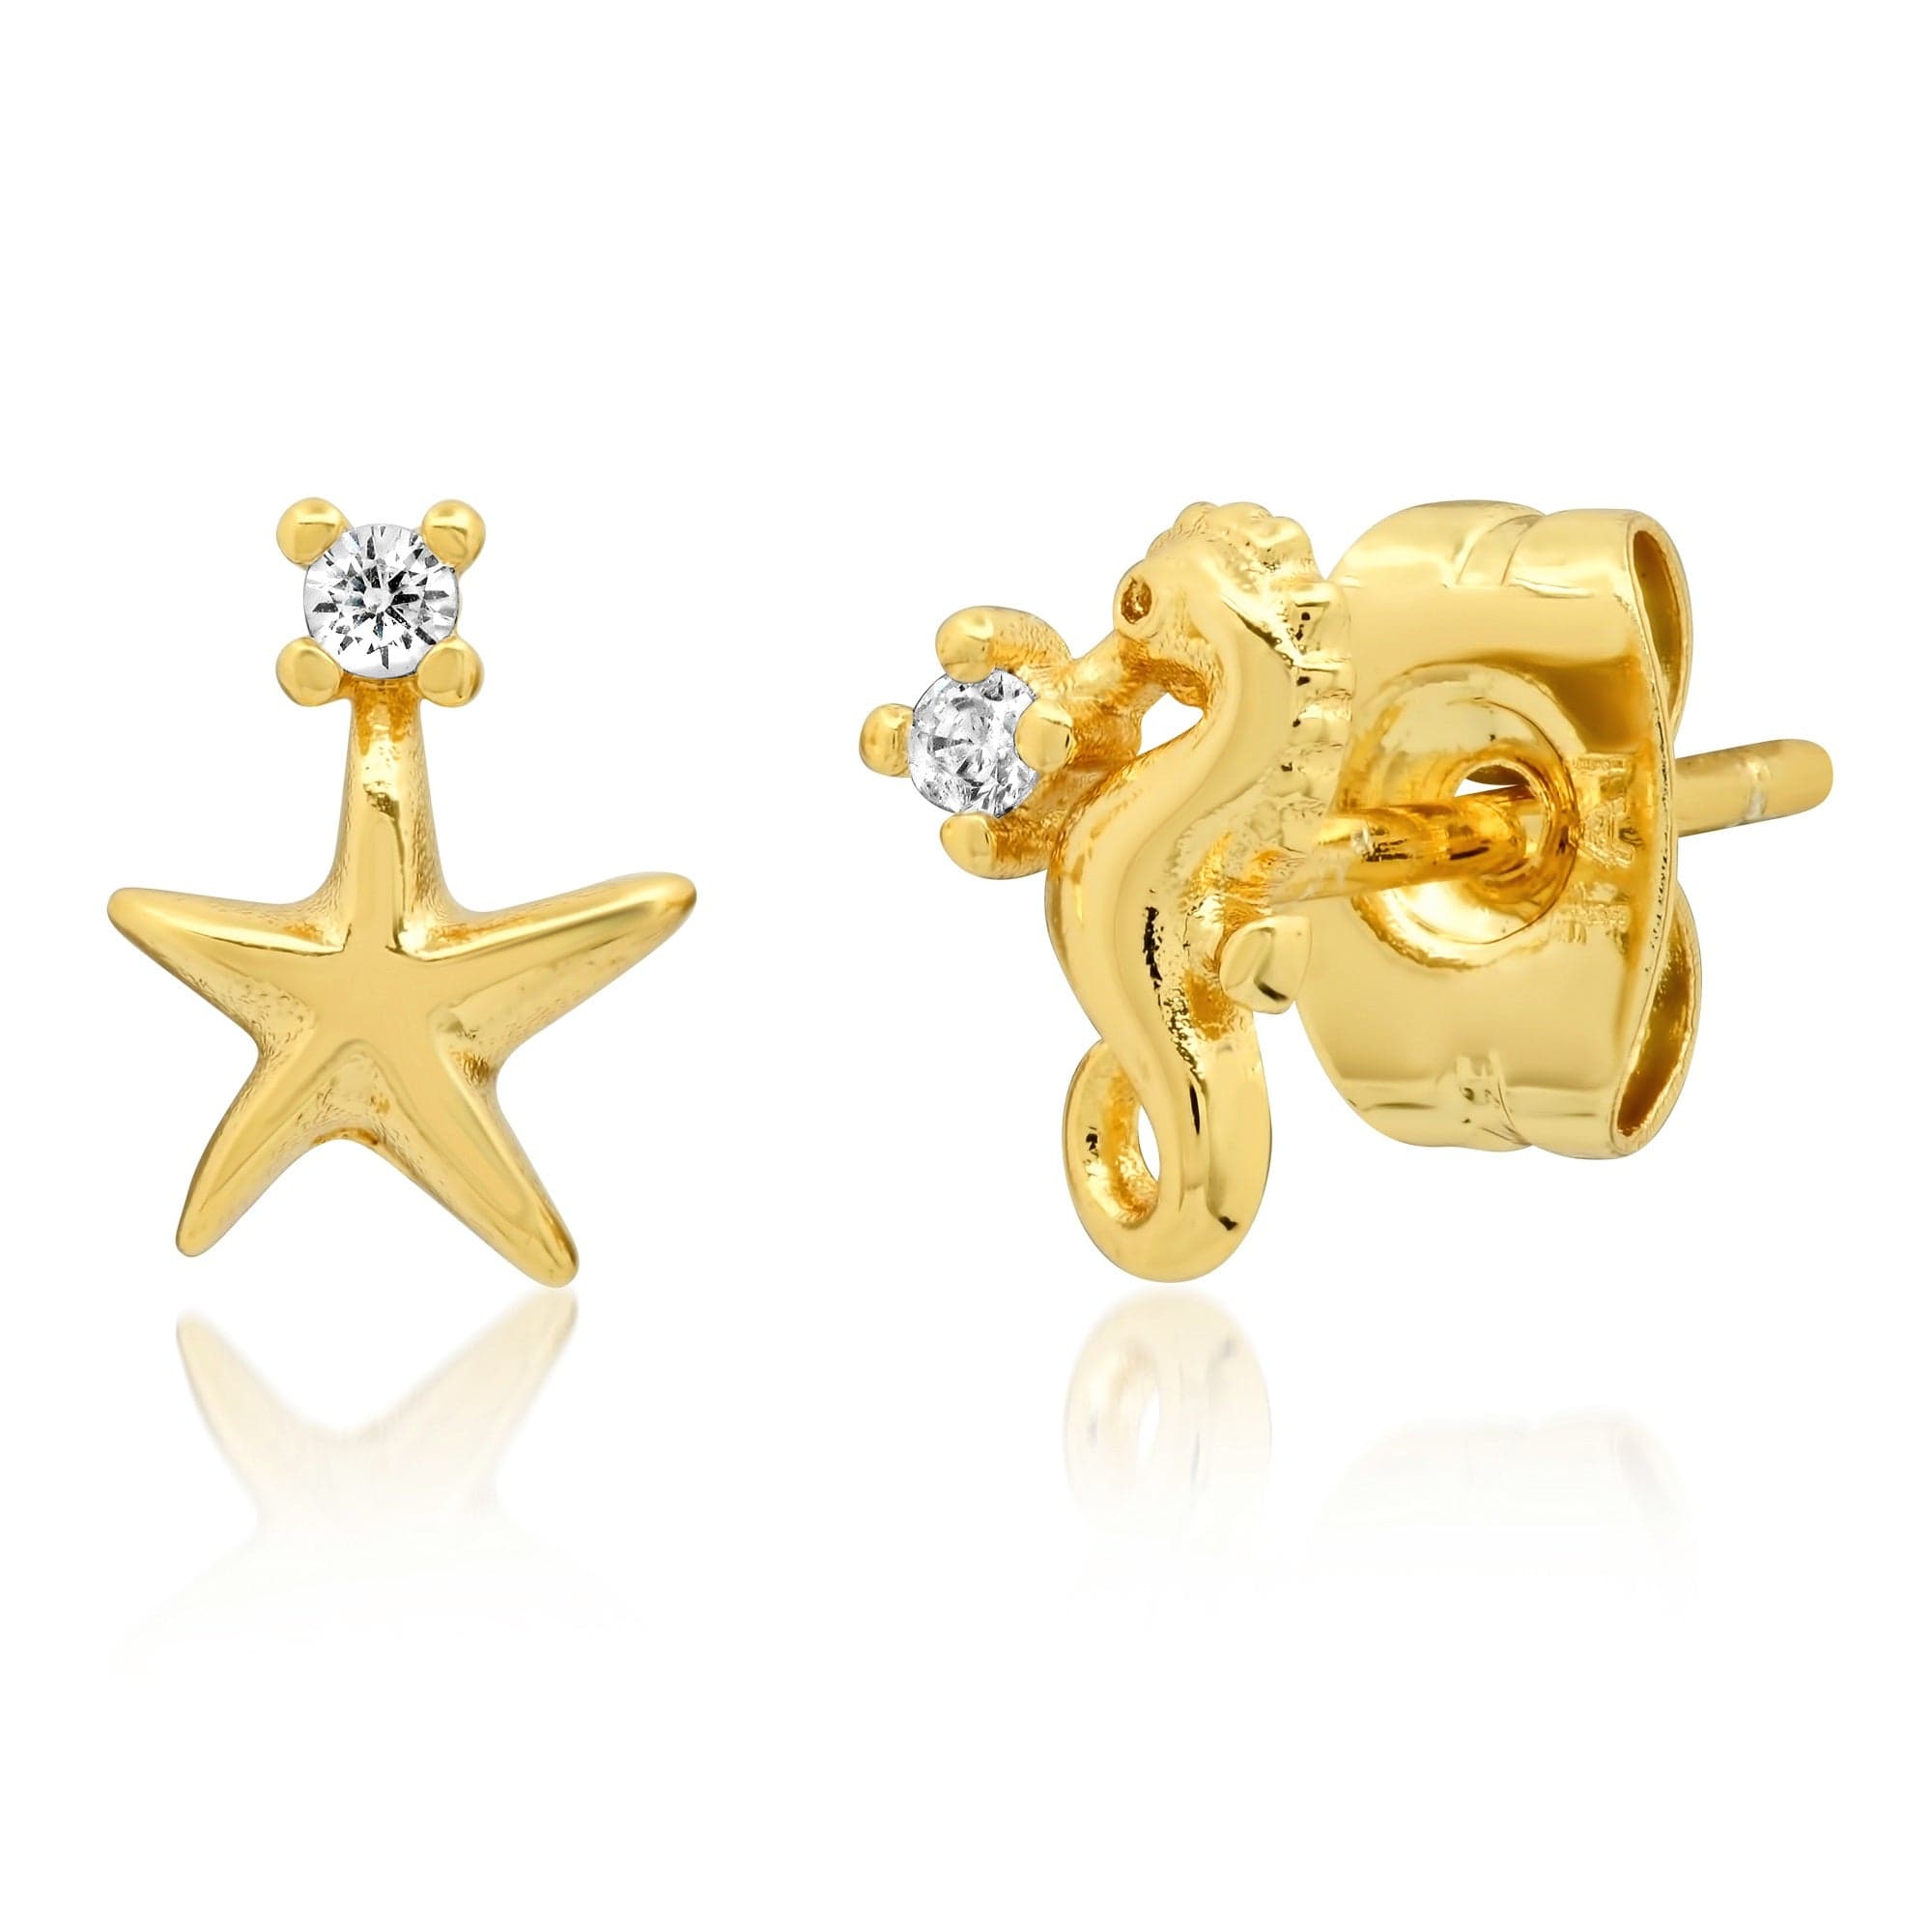 TAI JEWELRY Earrings Starfish And Seahorse Mismatched Studs